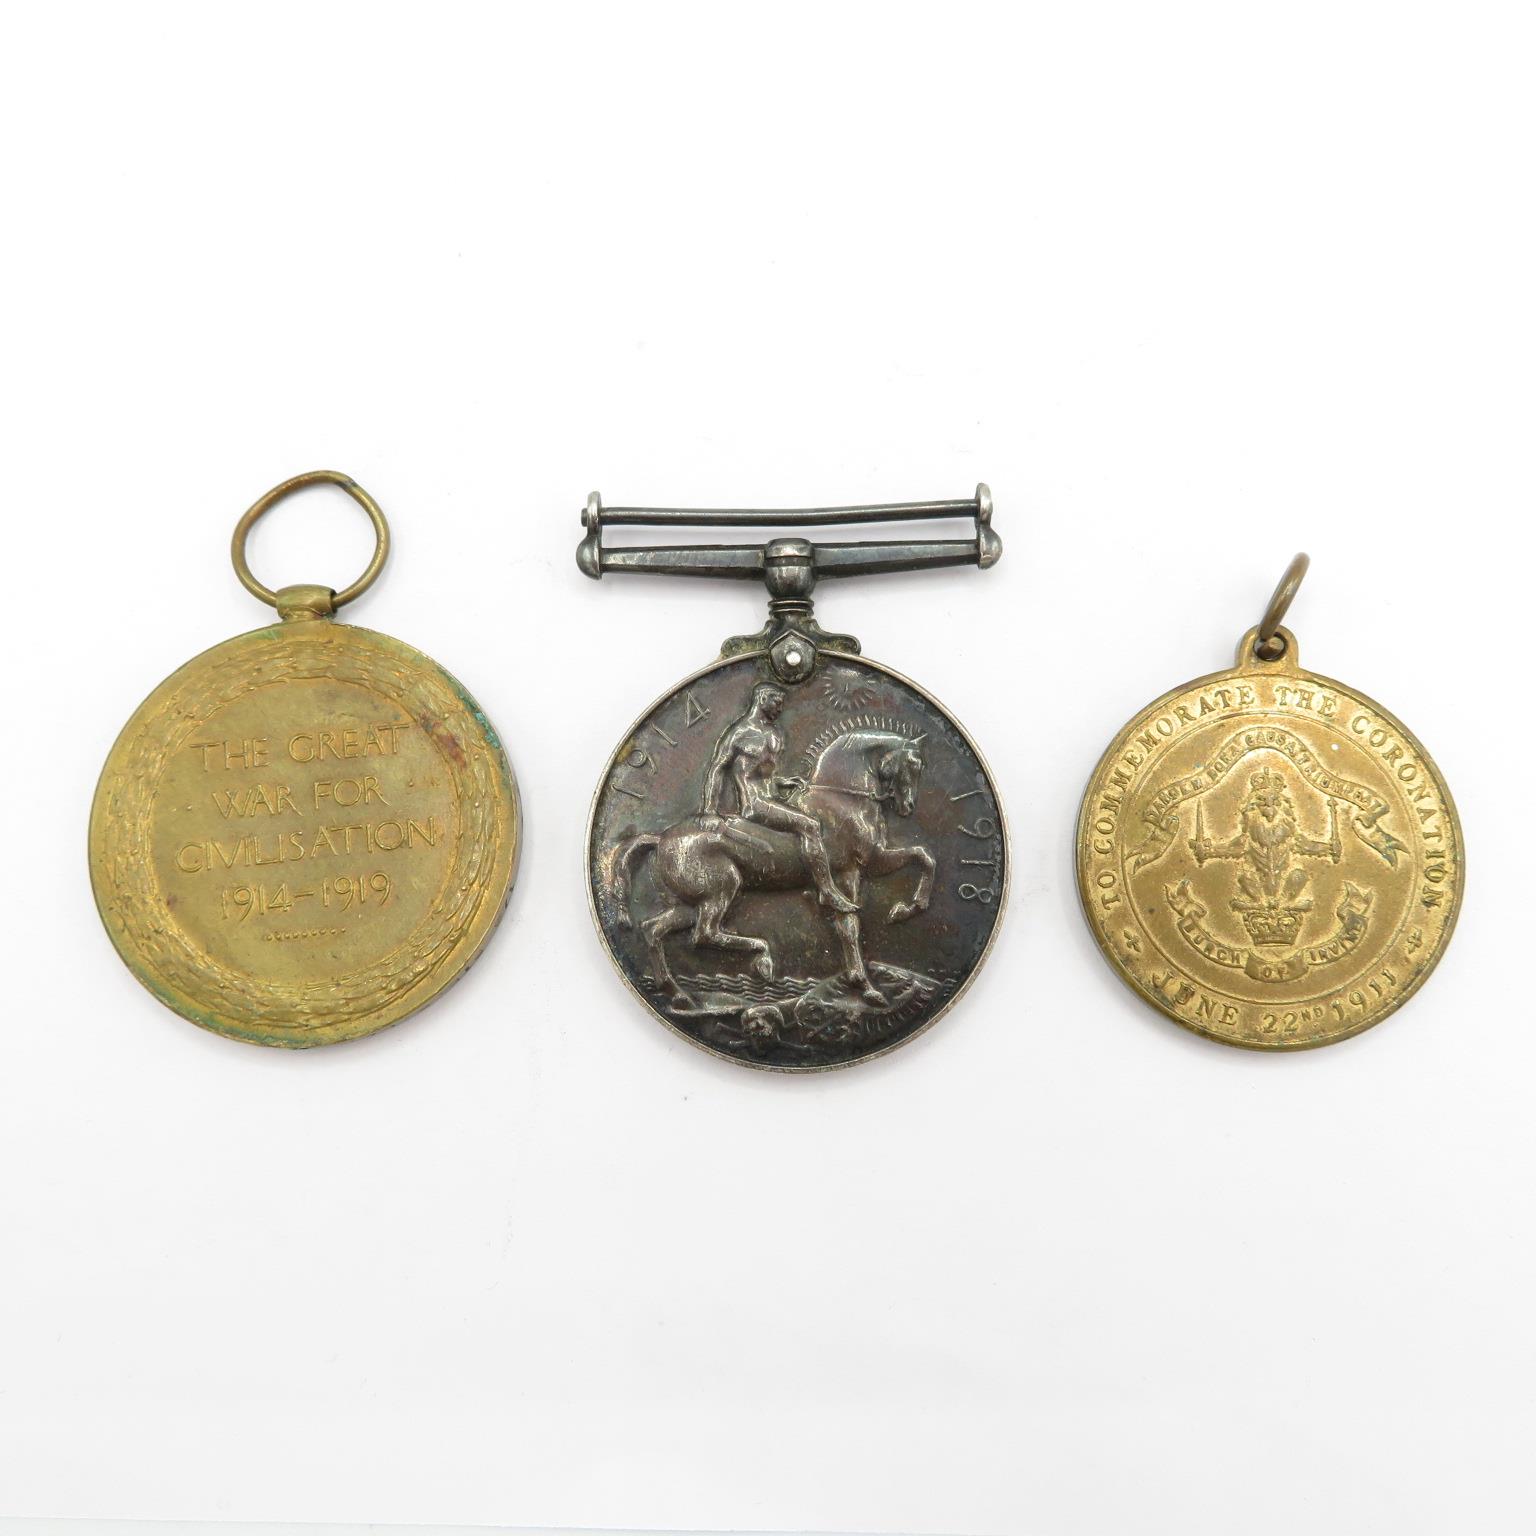 A pair of medals alongside a 3rd medal. Medals made out to 173 Pte R Laidlaw of the Irish Rifles - Image 2 of 2